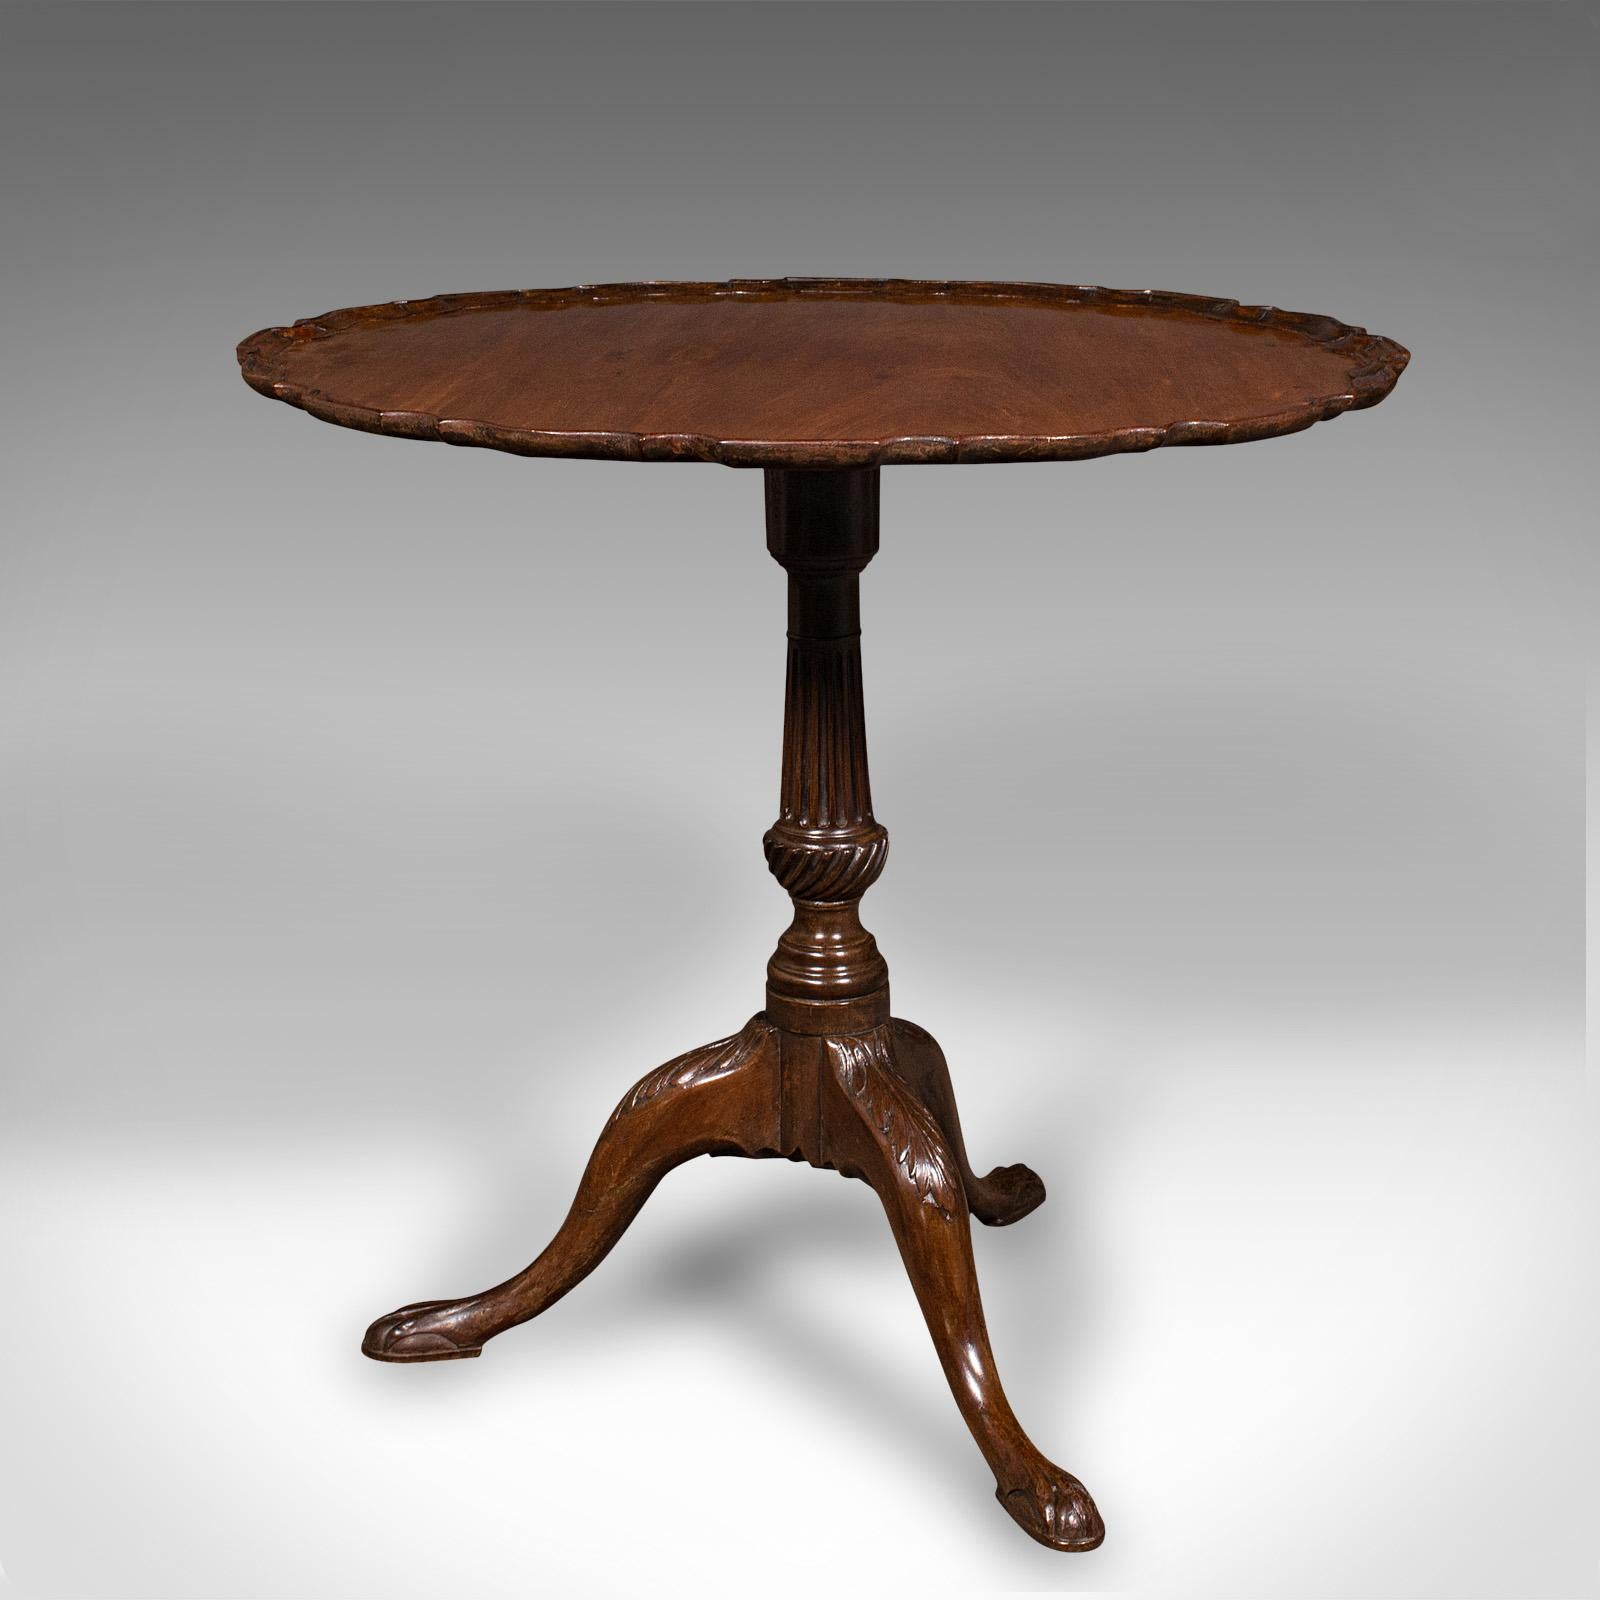 Antique Pie Crust Lamp Table, English, Tilt Top, Occasional, Victorian, C.1870 In Good Condition For Sale In Hele, Devon, GB